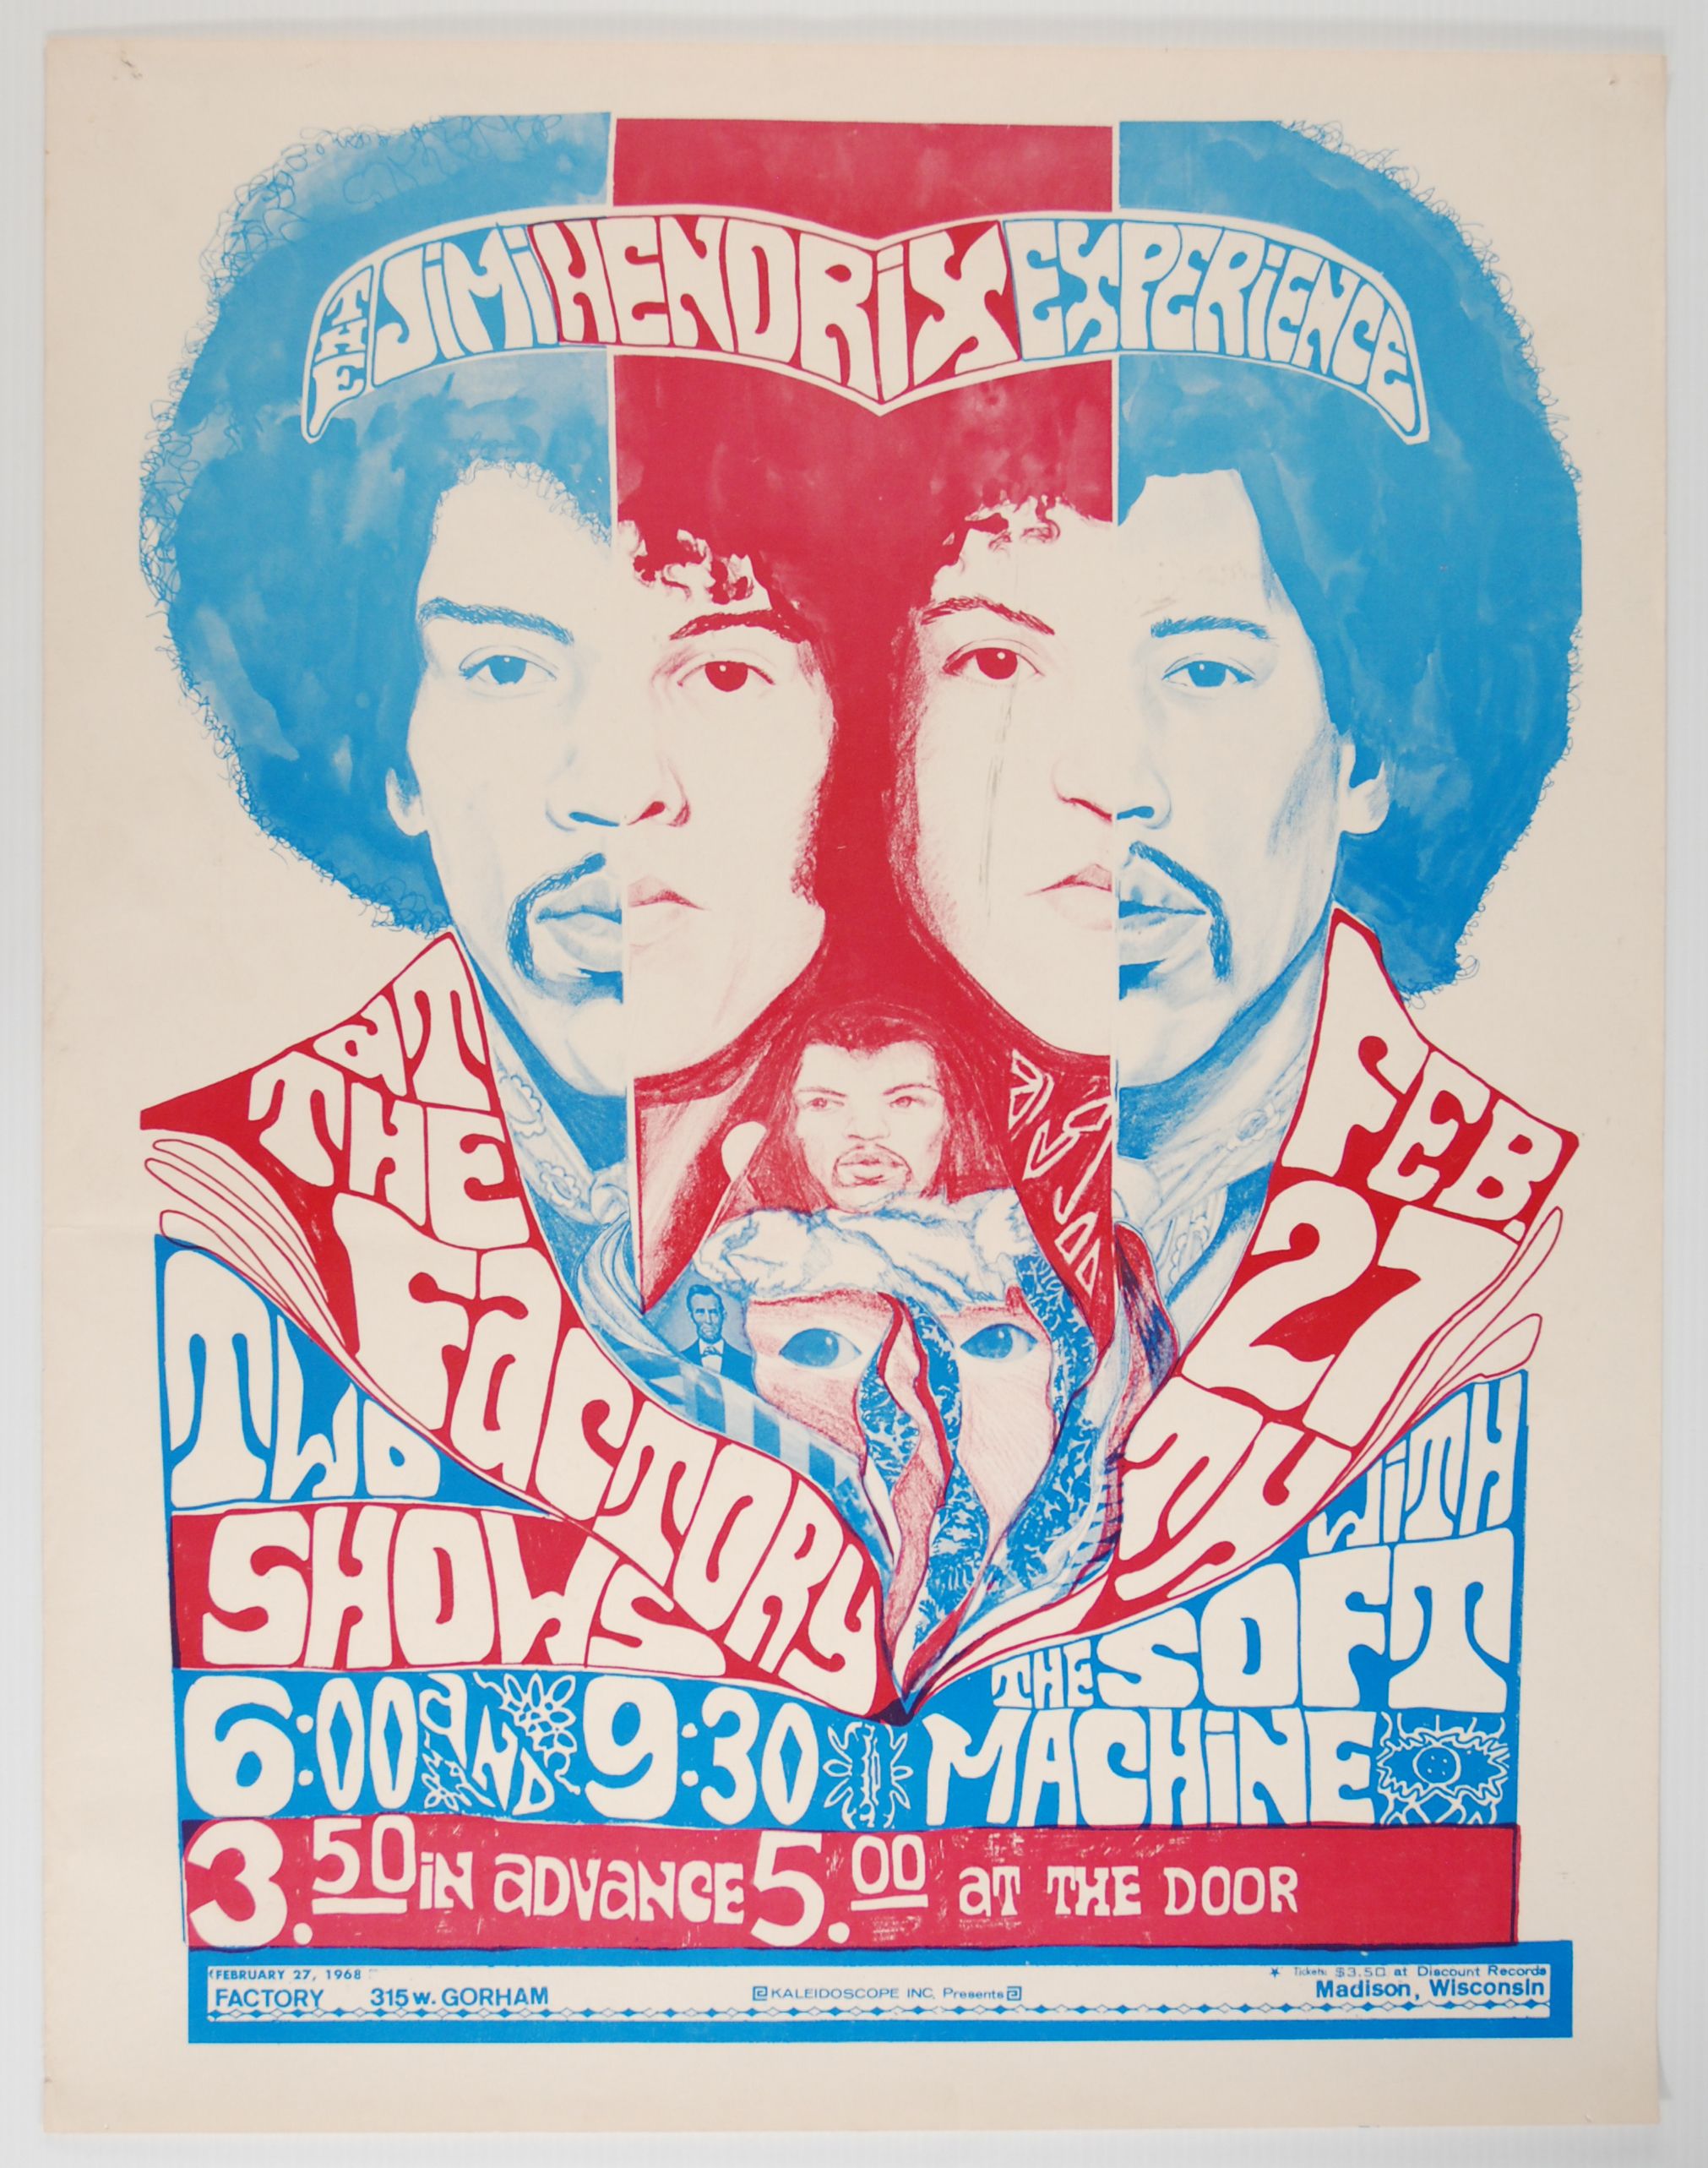 Jimi Hendrix Experience The Factory 1967 Concert Poster